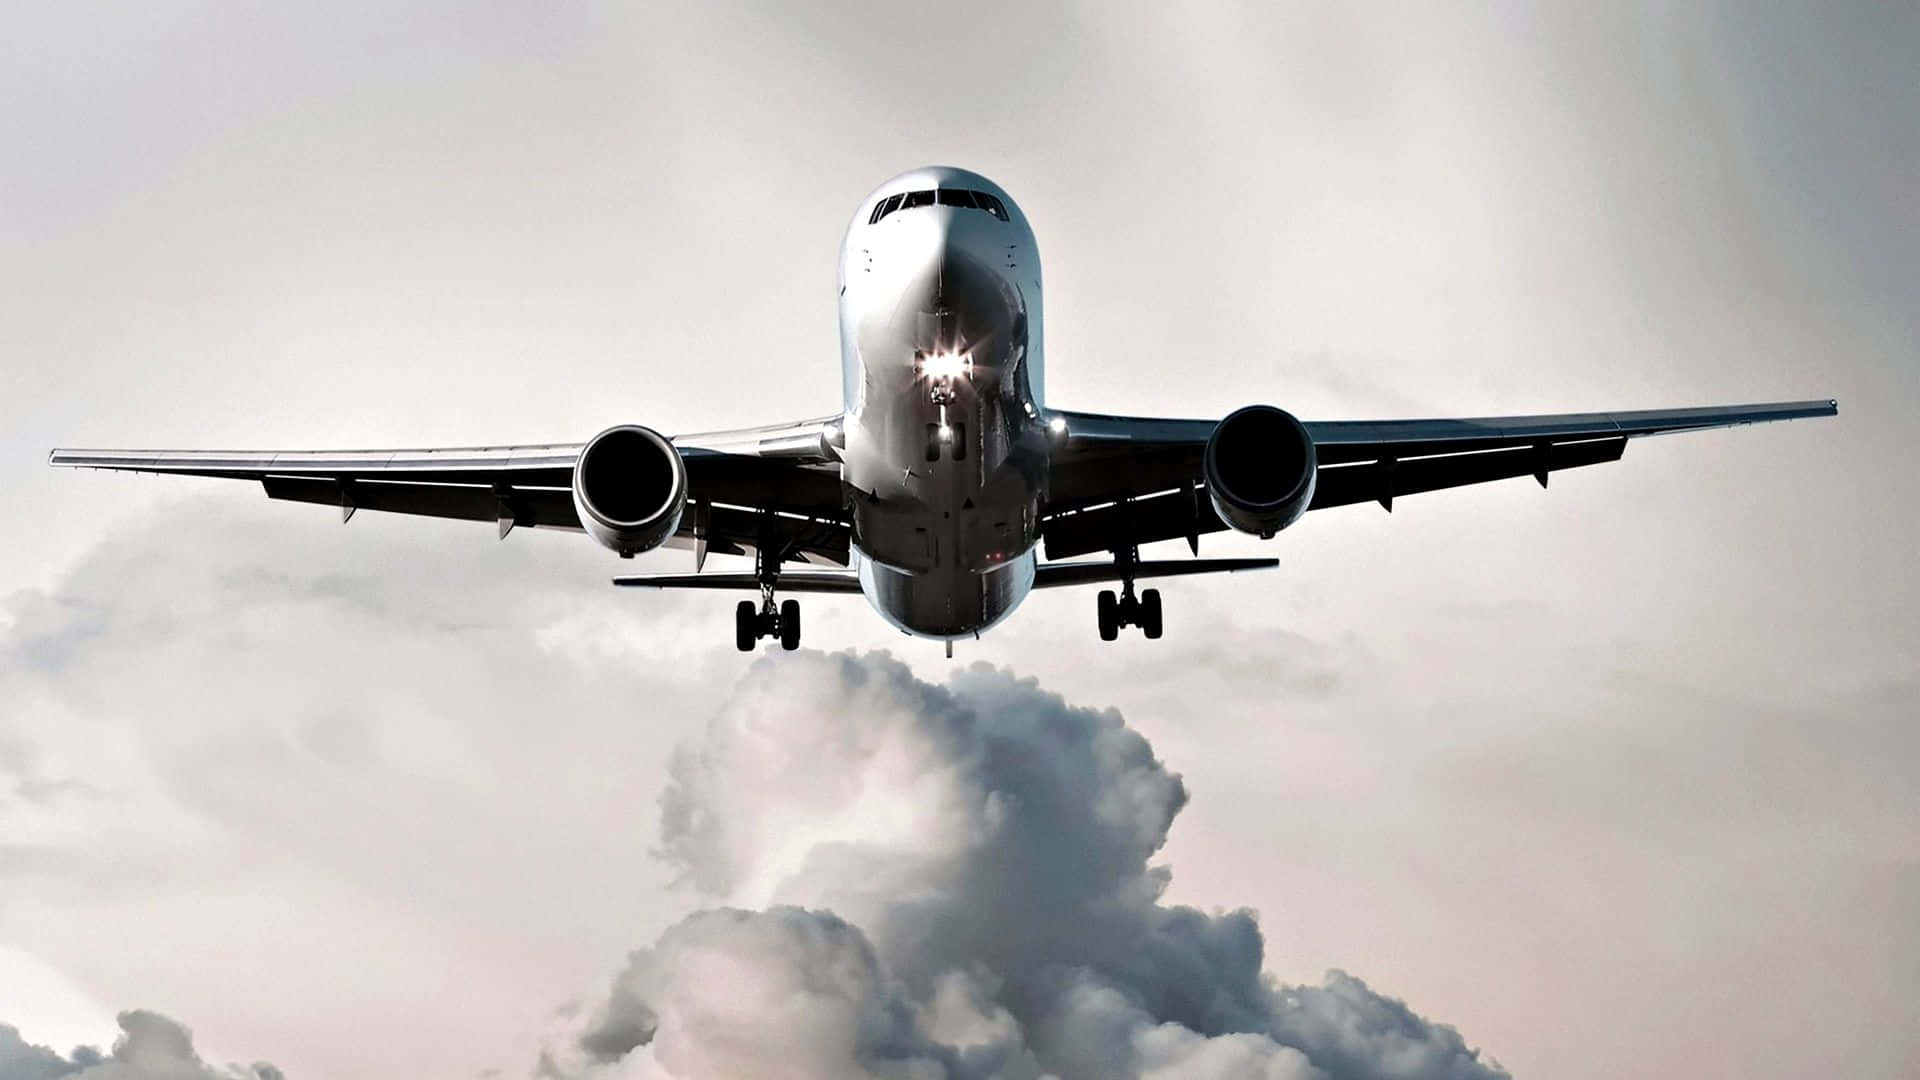 A passenger aircraft takes off into the sky. Wallpaper